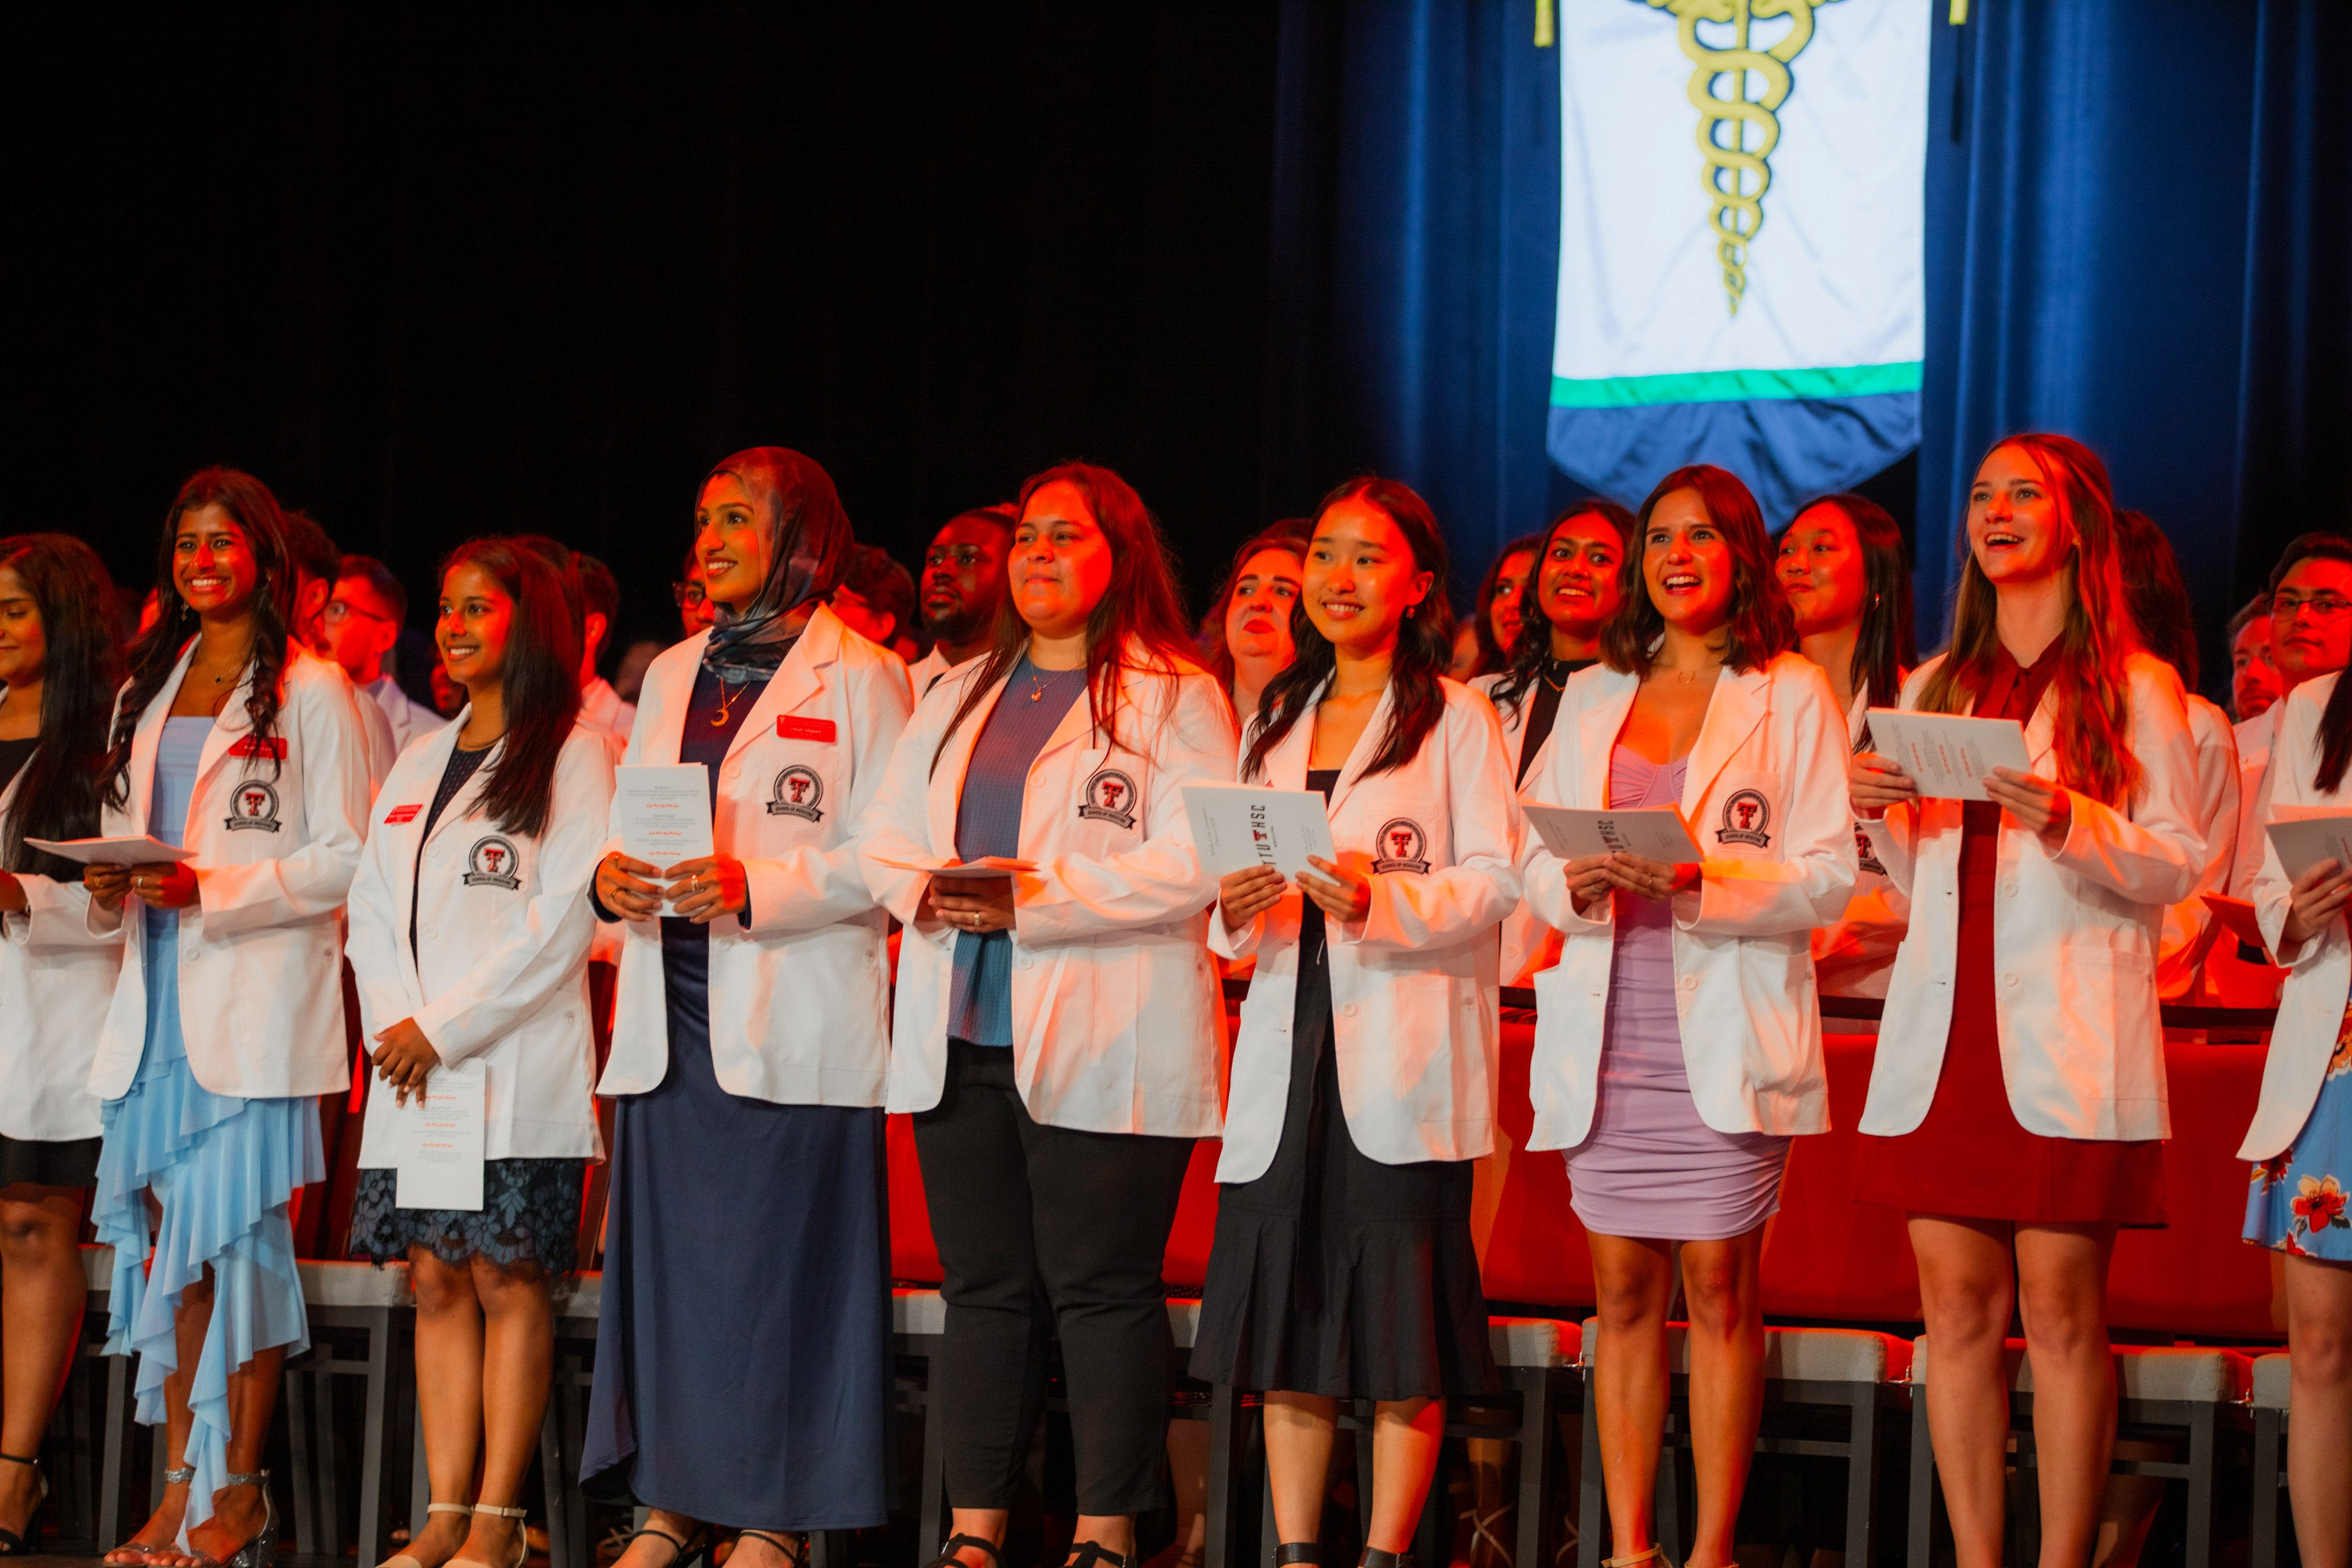 Next generation of physicians: TTUHSC medical students receive white coats at ceremony